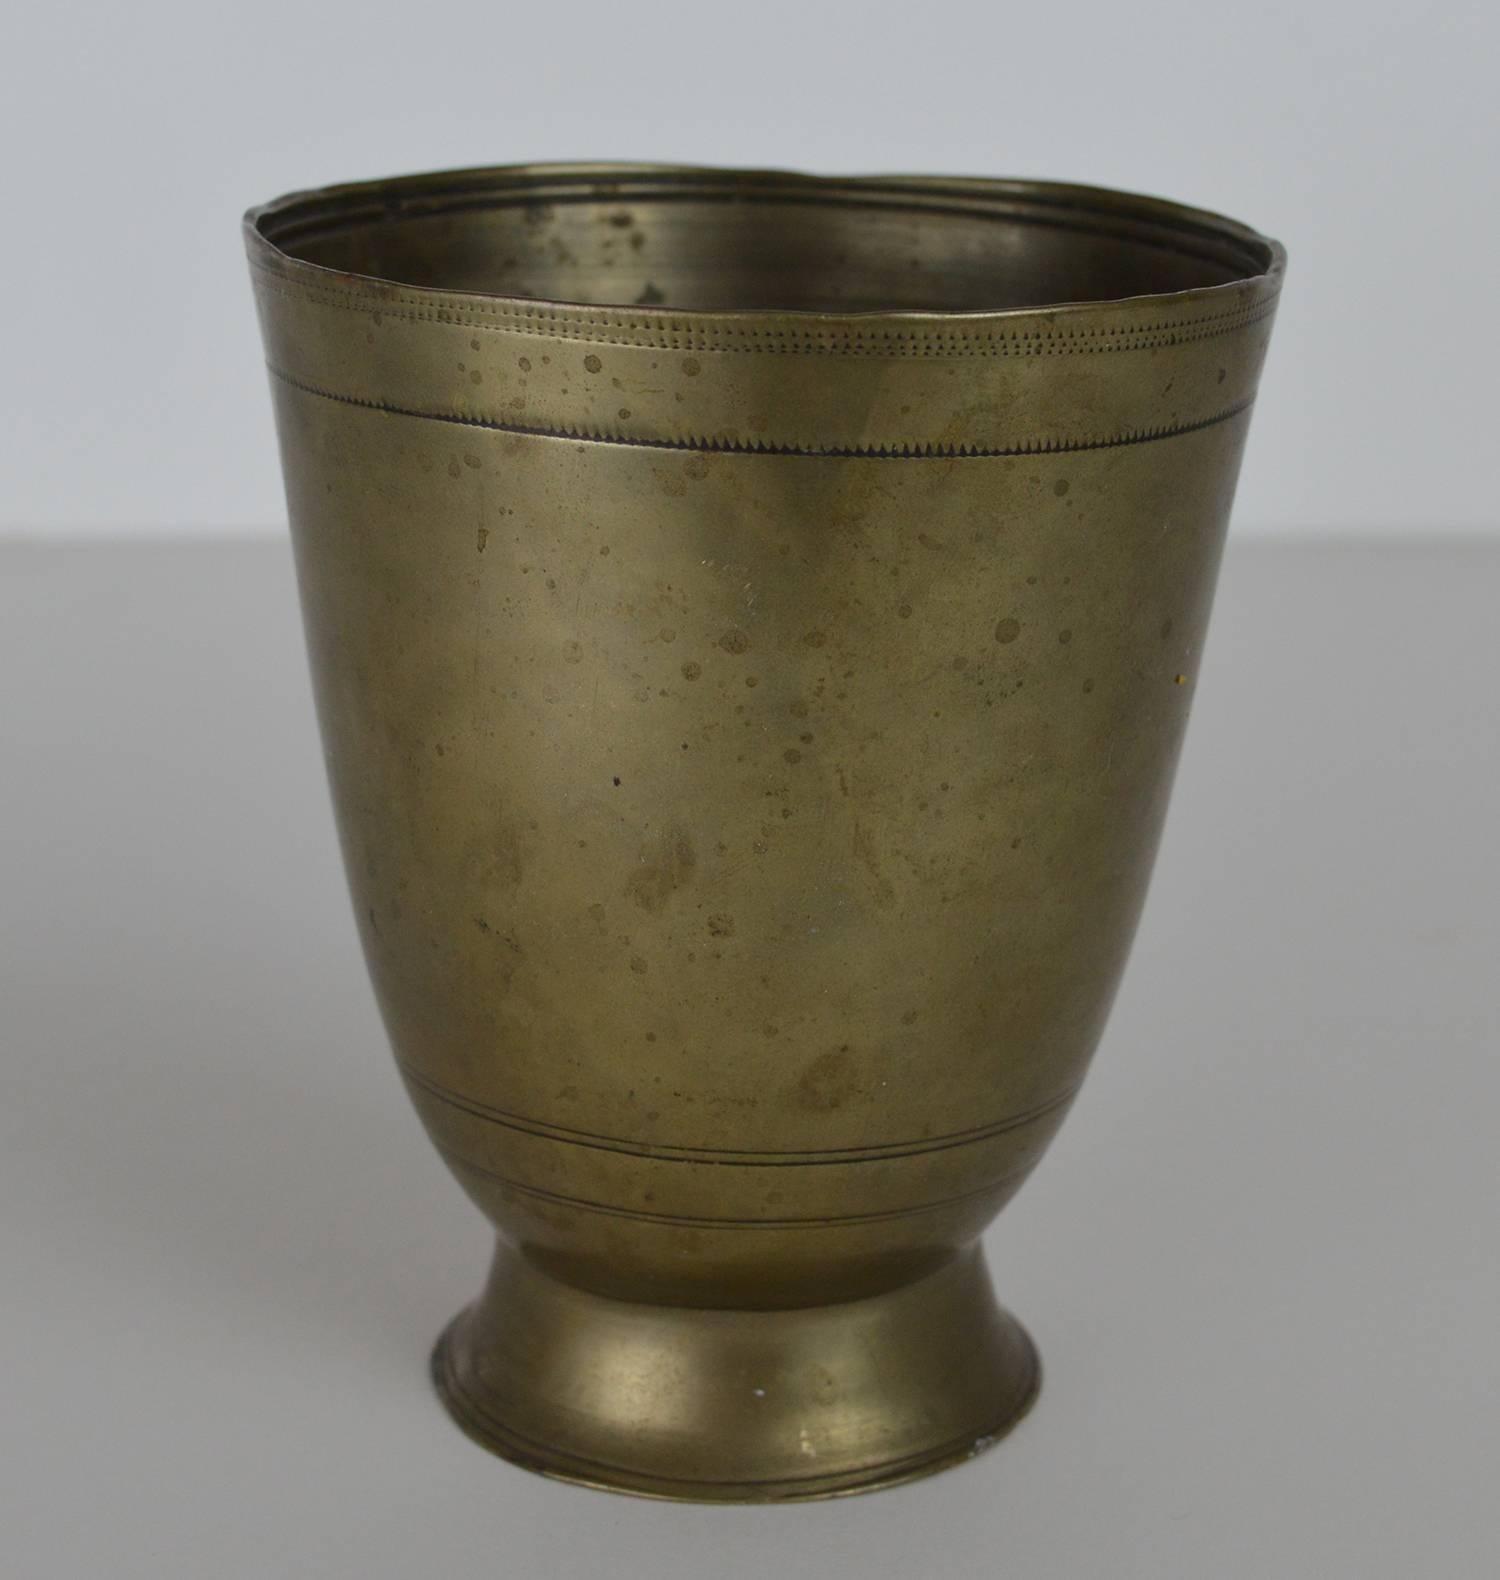 This fine antique tumbler cup has a plain circular form.

Made from the rare and highly prized metal Paktong.

Similar in shape to silver examples of the same period.

The surface of this antique cup is embellished with three bands of tooled